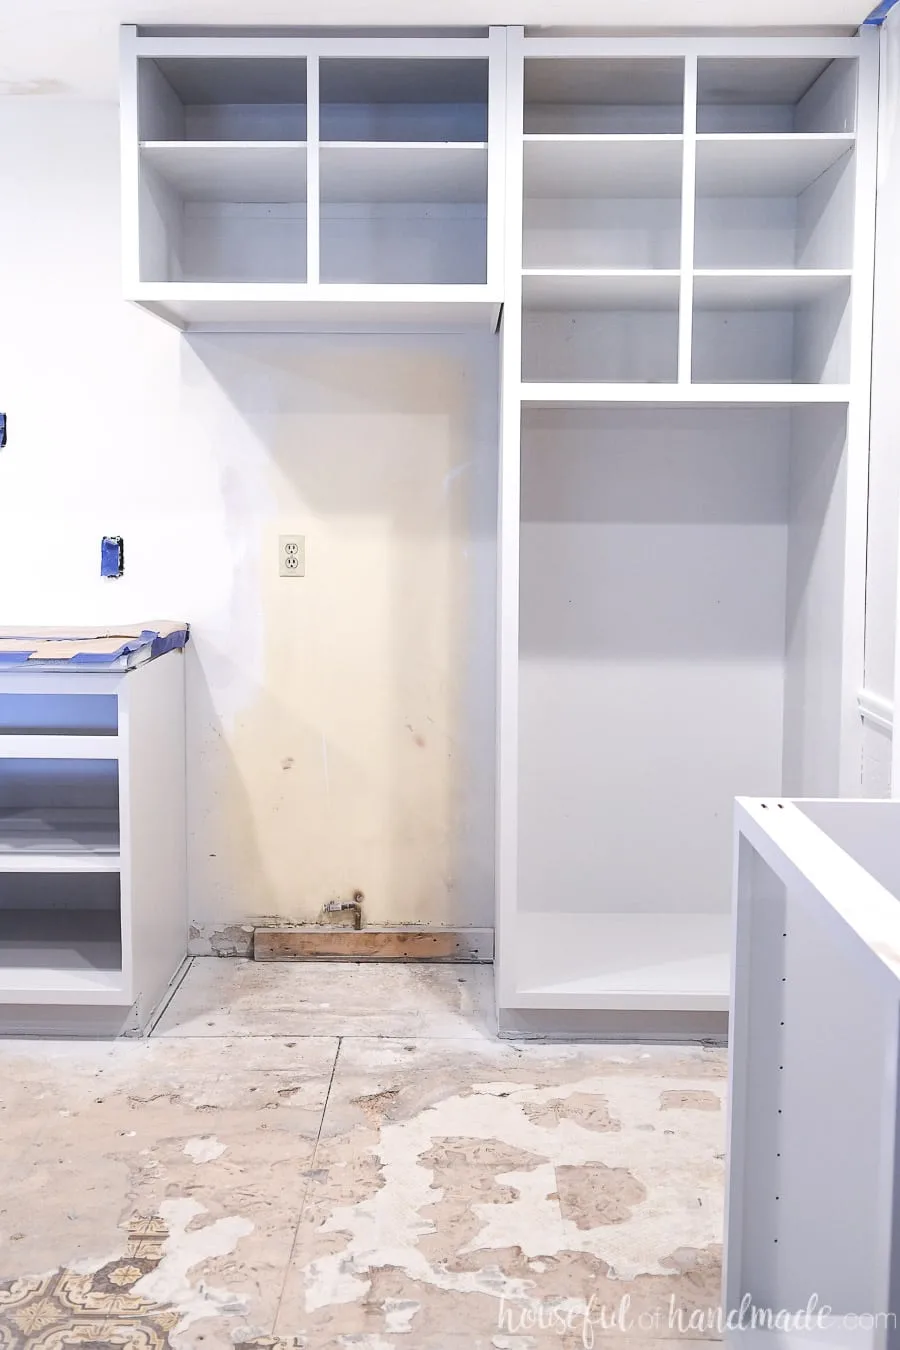 Pantry and over fridge cabinet painted with a paint sprayer.